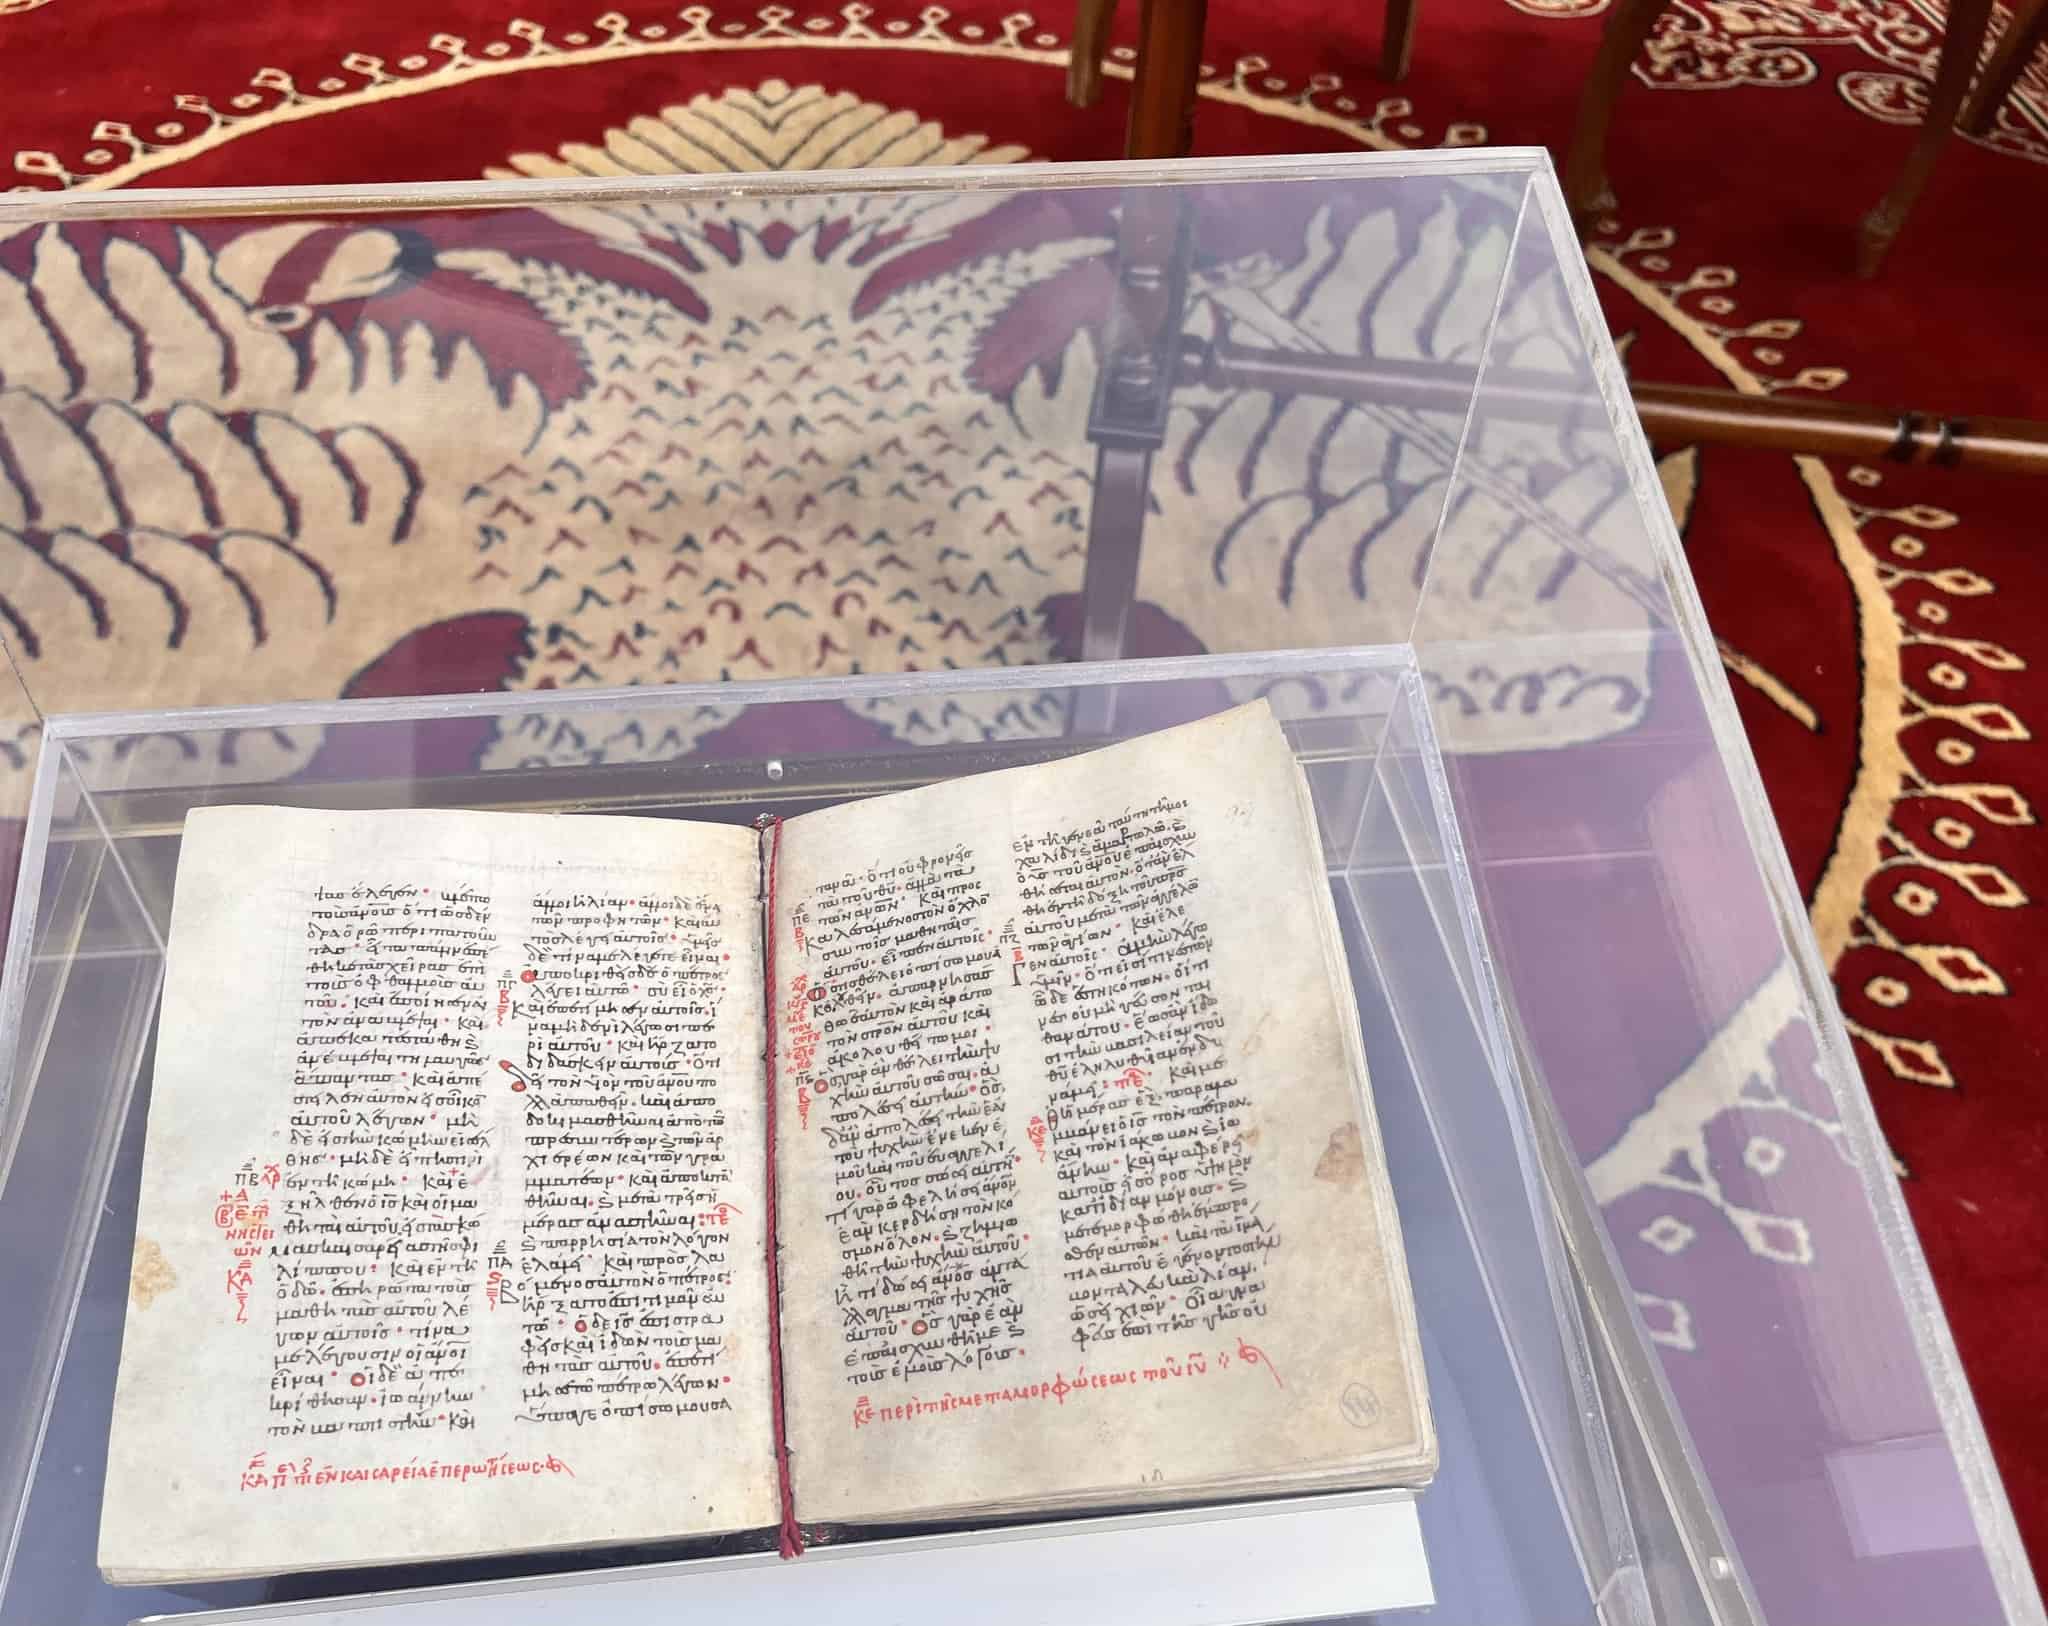 Thousand-year-old Manuscript Returned to Monastery in Greece, by Gaudium  Press English Edition